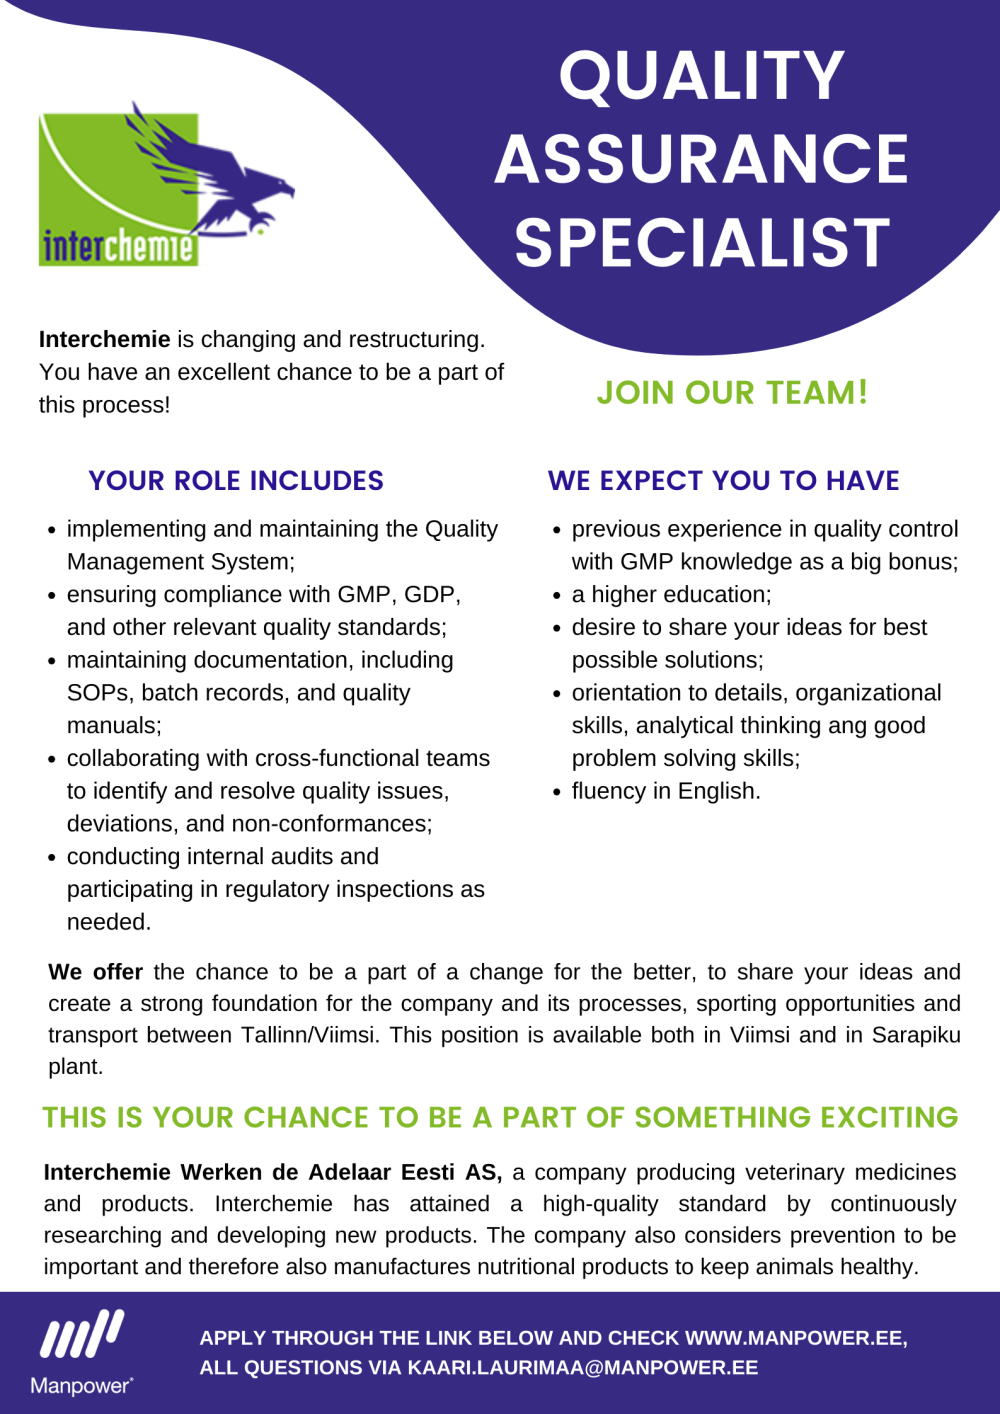 QUALITY ASSURANCE SPECIALIST